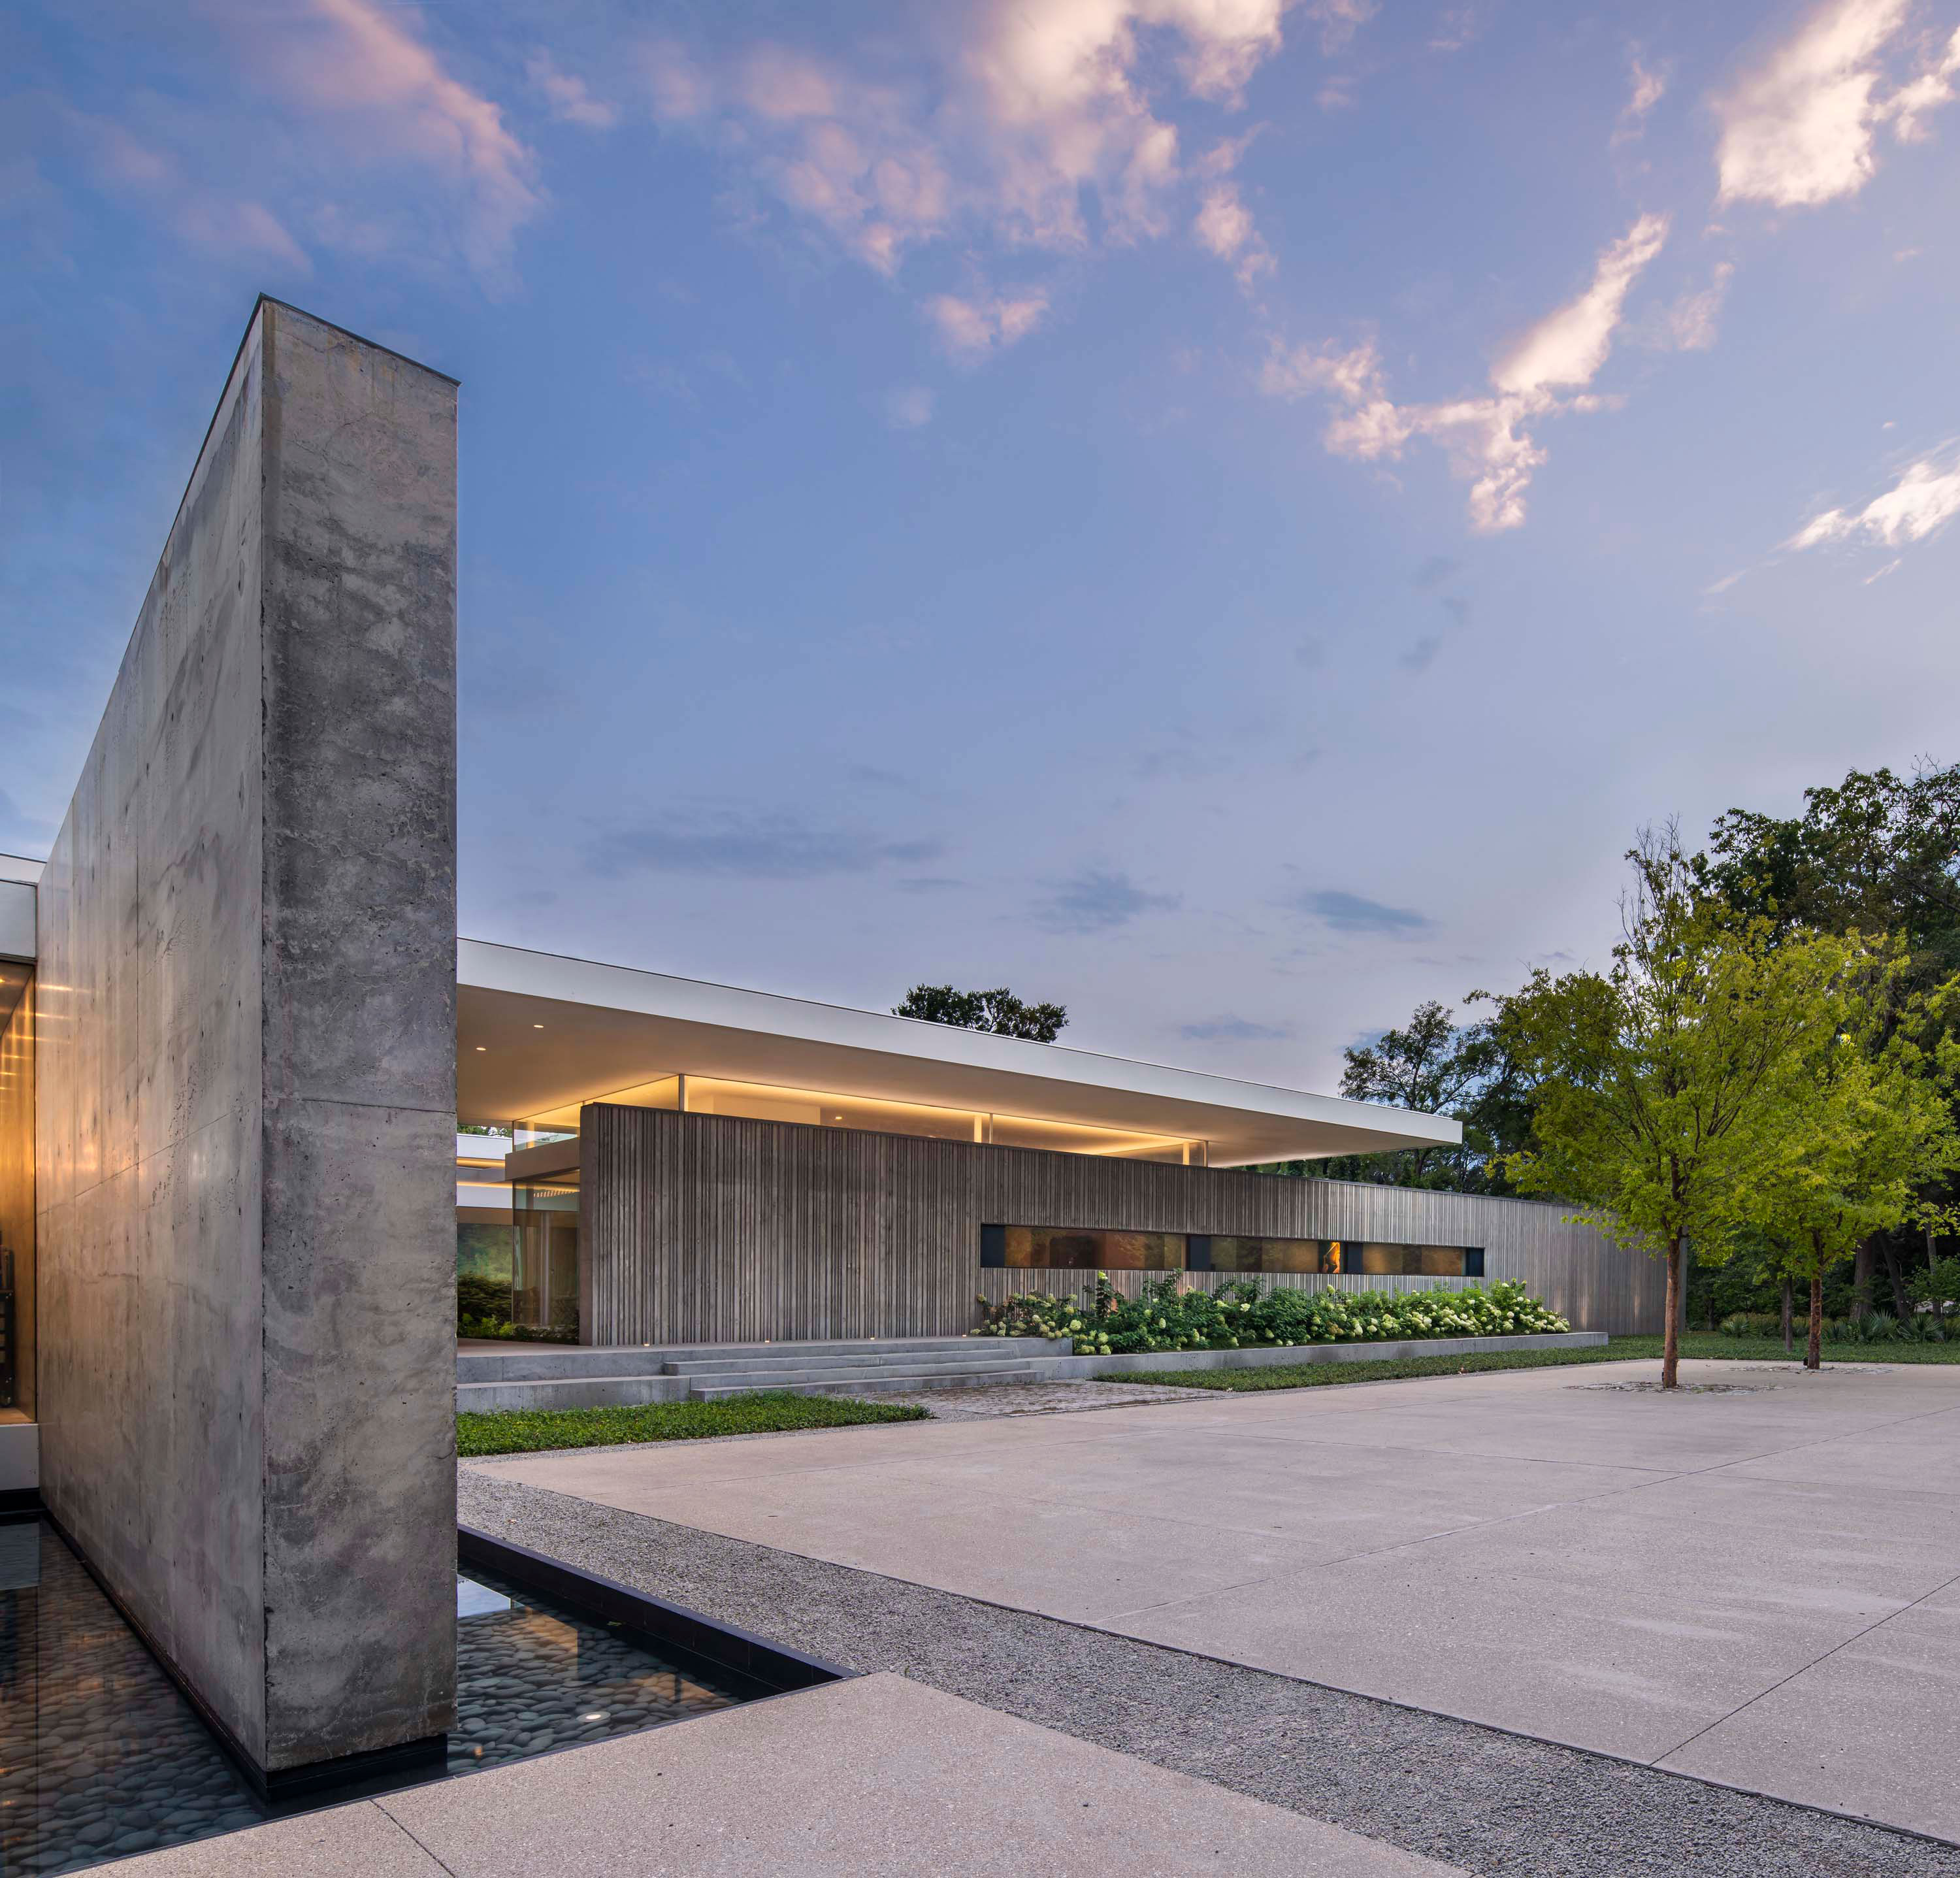 Exterior photo of the Preston Hollow Residence by Specht Novak Architects. Shot at dusk by Manolo Langis, featuring the glowing home, and monolithic concrete wall.